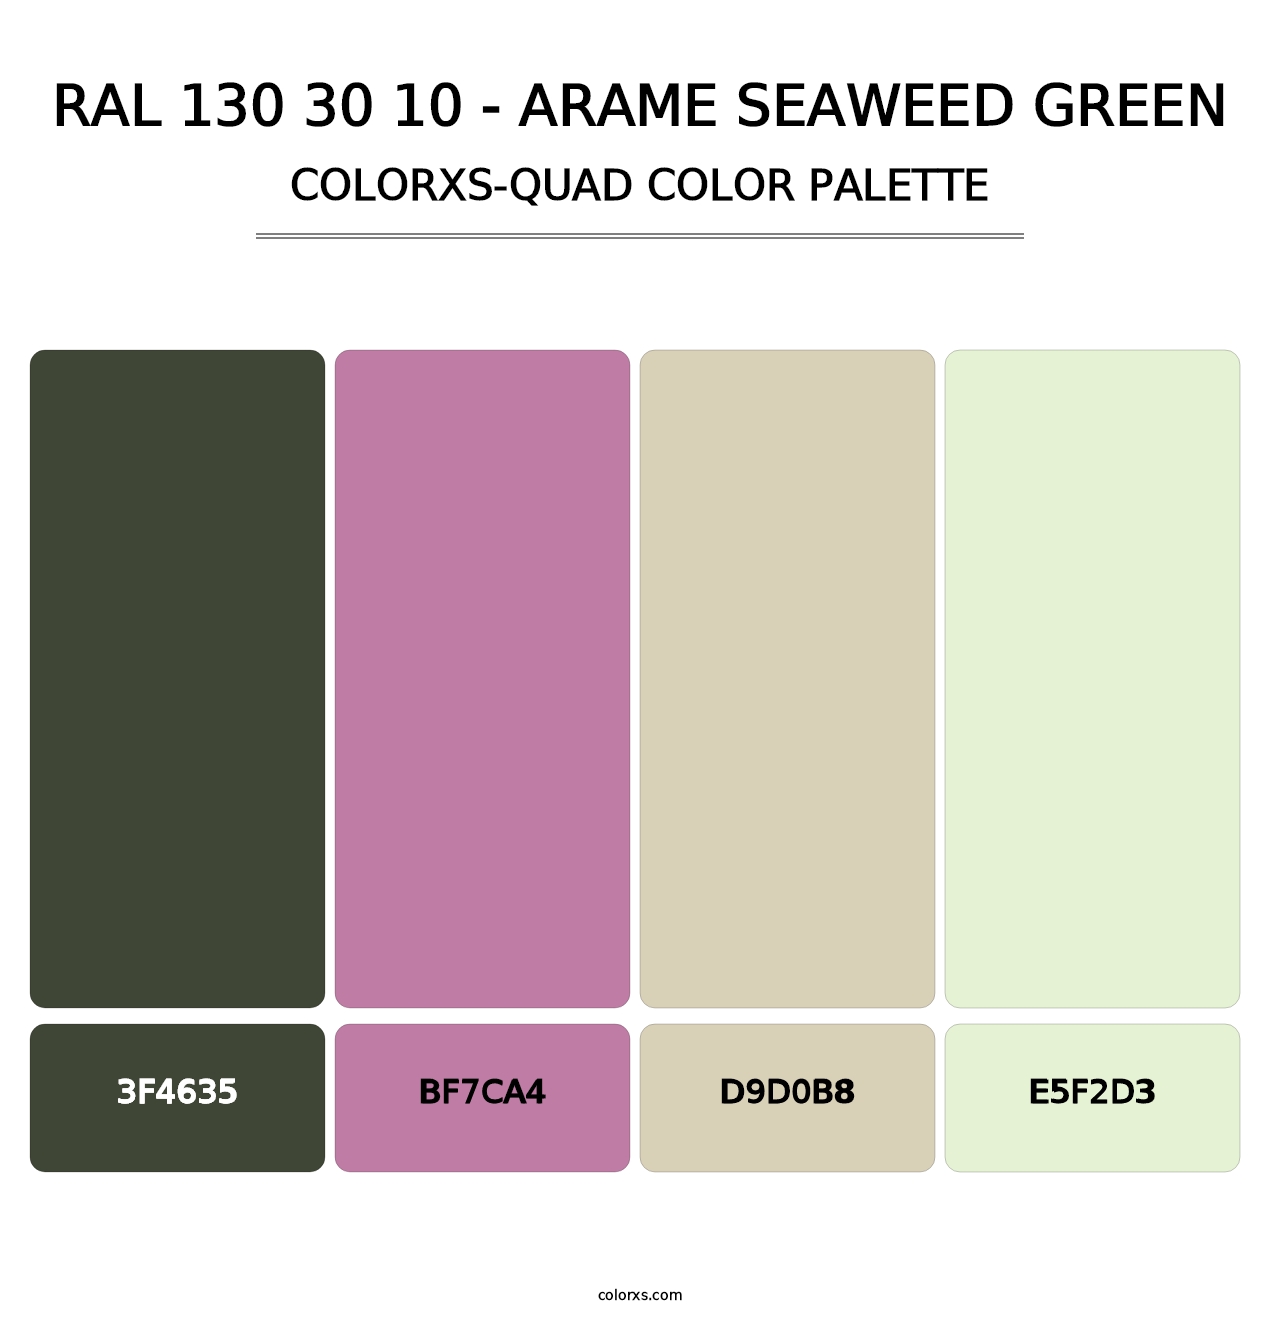 RAL 130 30 10 - Arame Seaweed Green - Colorxs Quad Palette